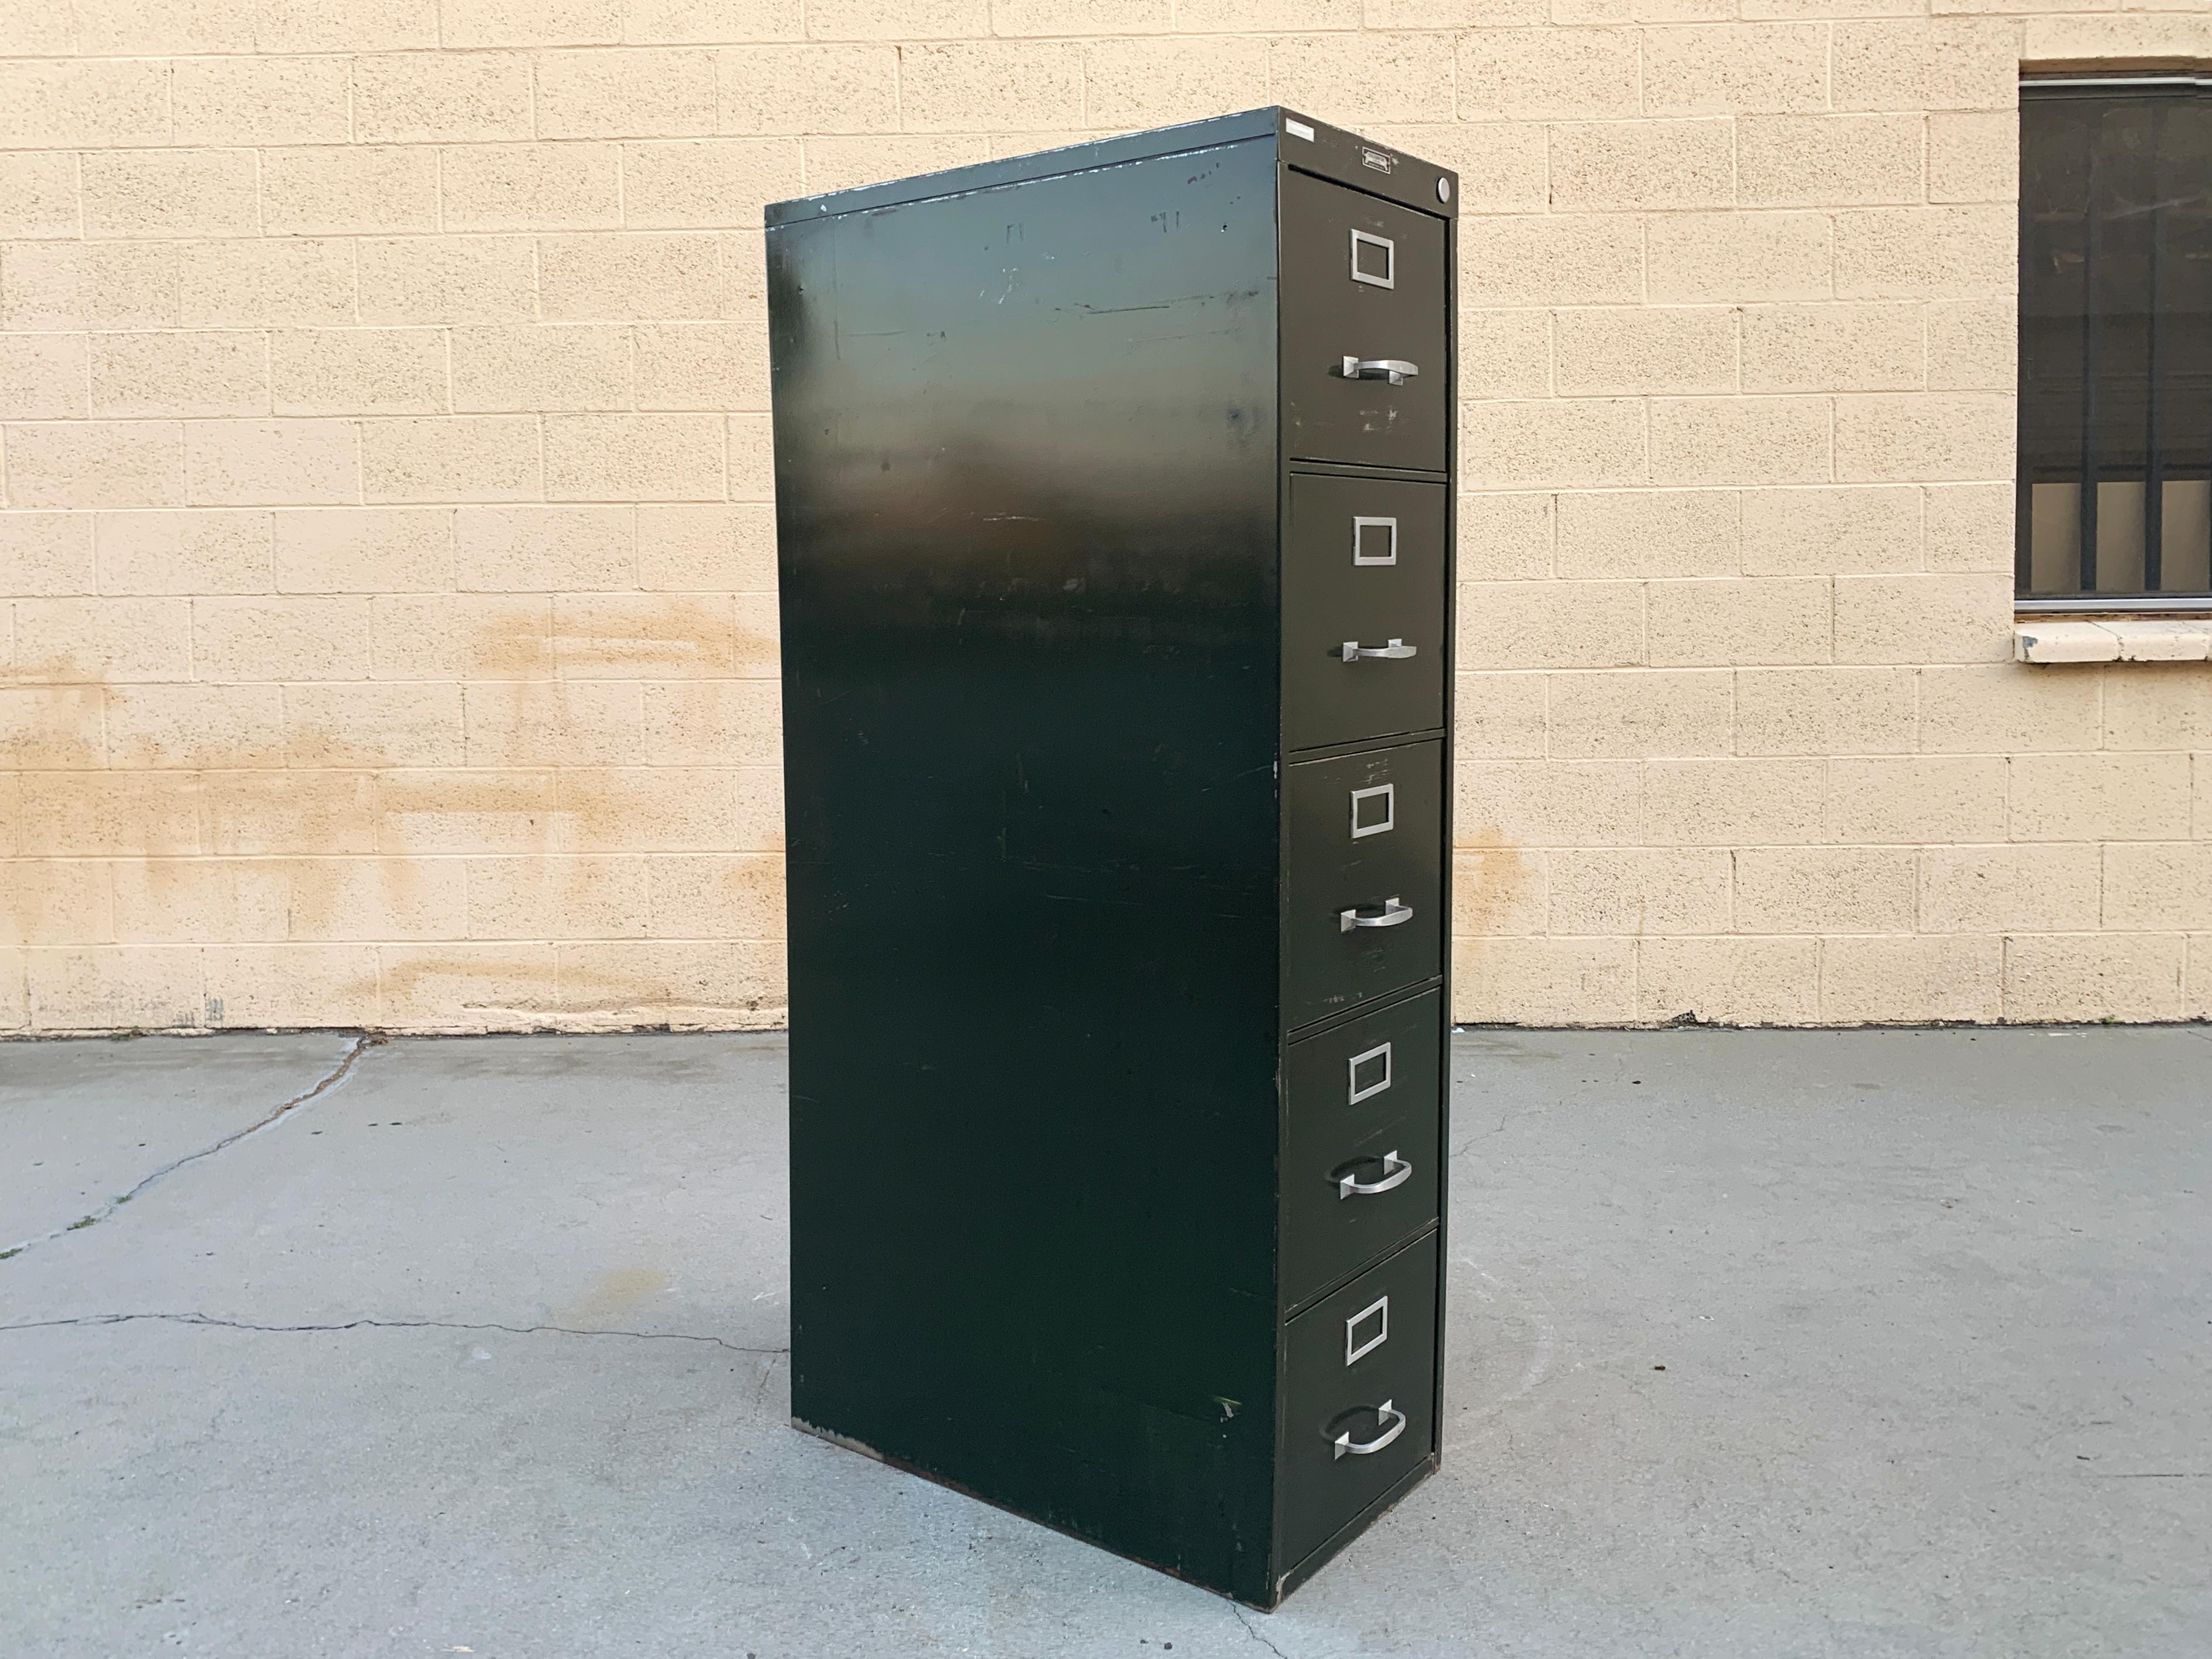 1940s steel file cabinet by Steel Furniture Mfg. Co., Baldwin Hills, CA. 5-drawer vertical configuration with original green paint. Classic tanker styling! 

Solid, heavy-duty construction. Very good vintage condition. Please refer to photos.